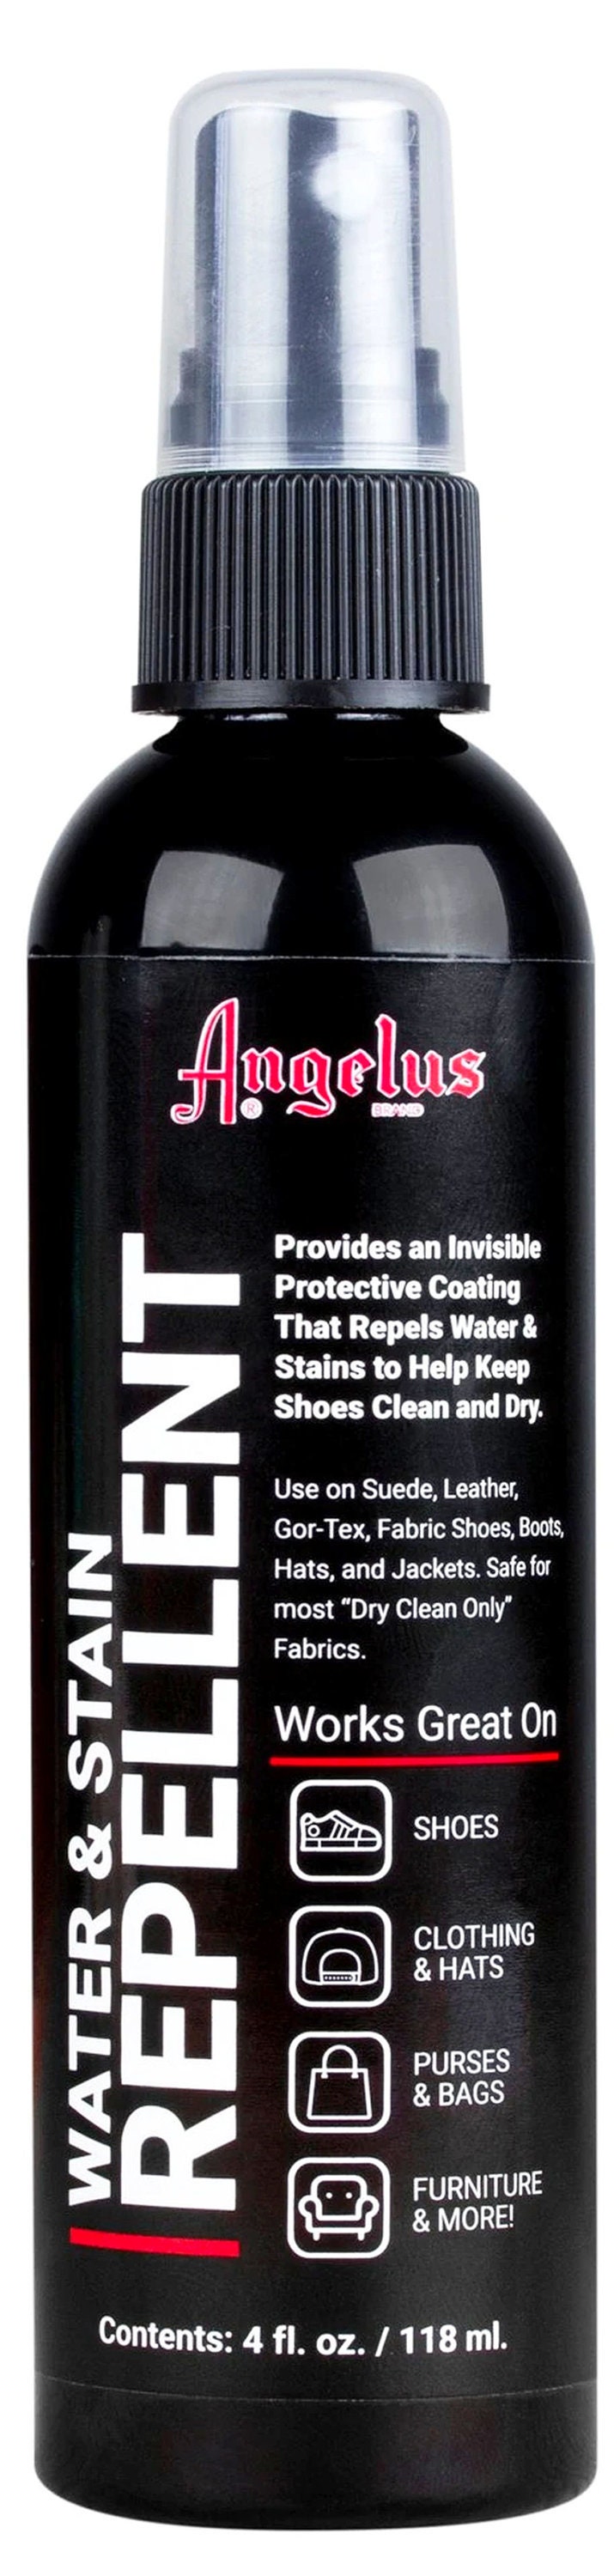 Spray Water & Stain Repellent for Boot Shoe Leather Suede Sneaker Fabric  Canvas Waterproof Protect Waterproofing Aerosol Angelus 851-05-000 